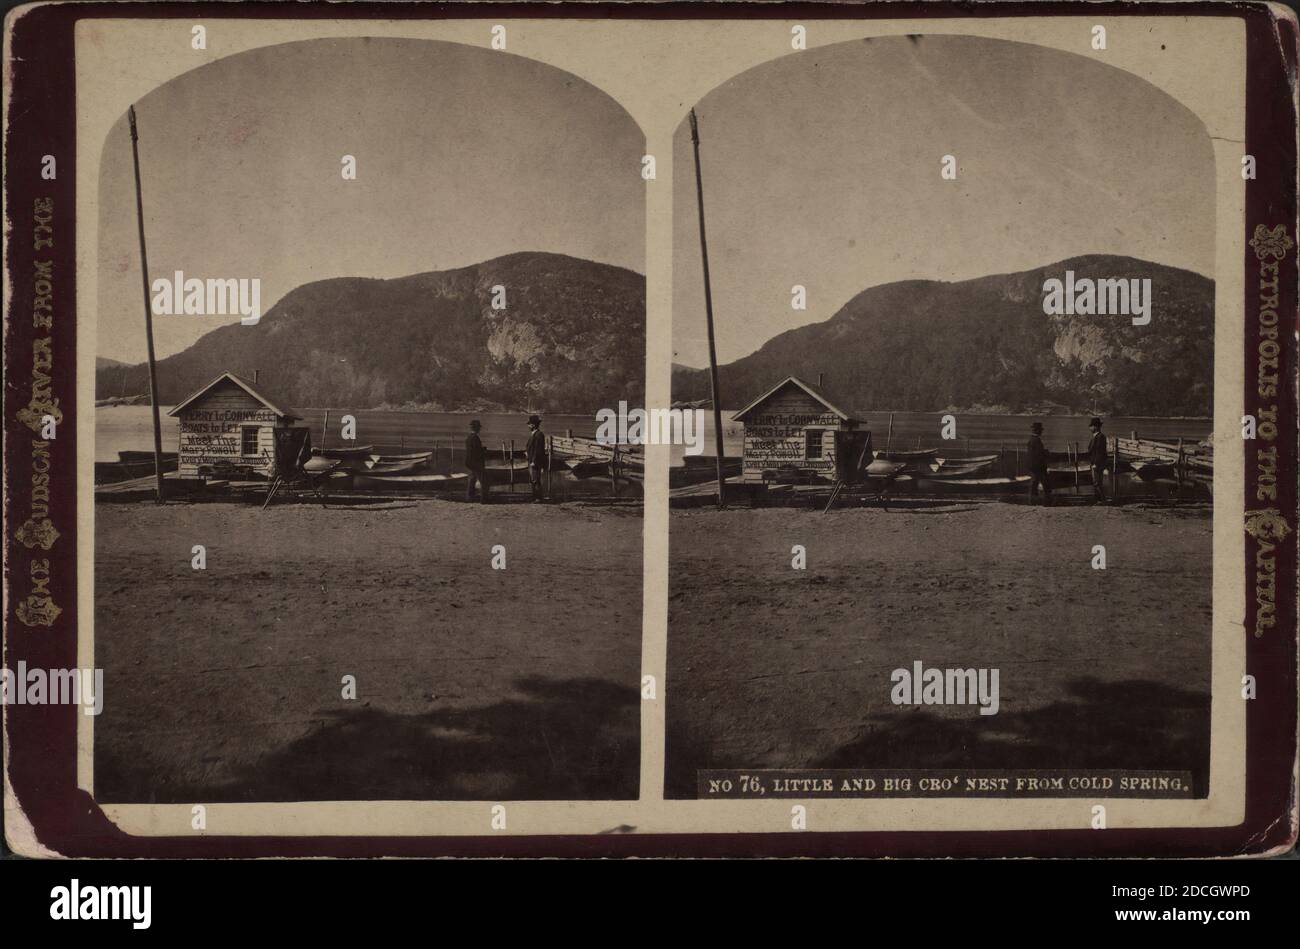 Little and Big Cro' Nest, from Cold Spring., Veeder, Aaron, ca. 1855-ca. 1930, Waterfronts, Ferry terminals, New York (State), Hudson River Valley (N.Y. and N.J.), Hudson Highlands (N.Y.), Cold Spring (N.Y Stock Photo